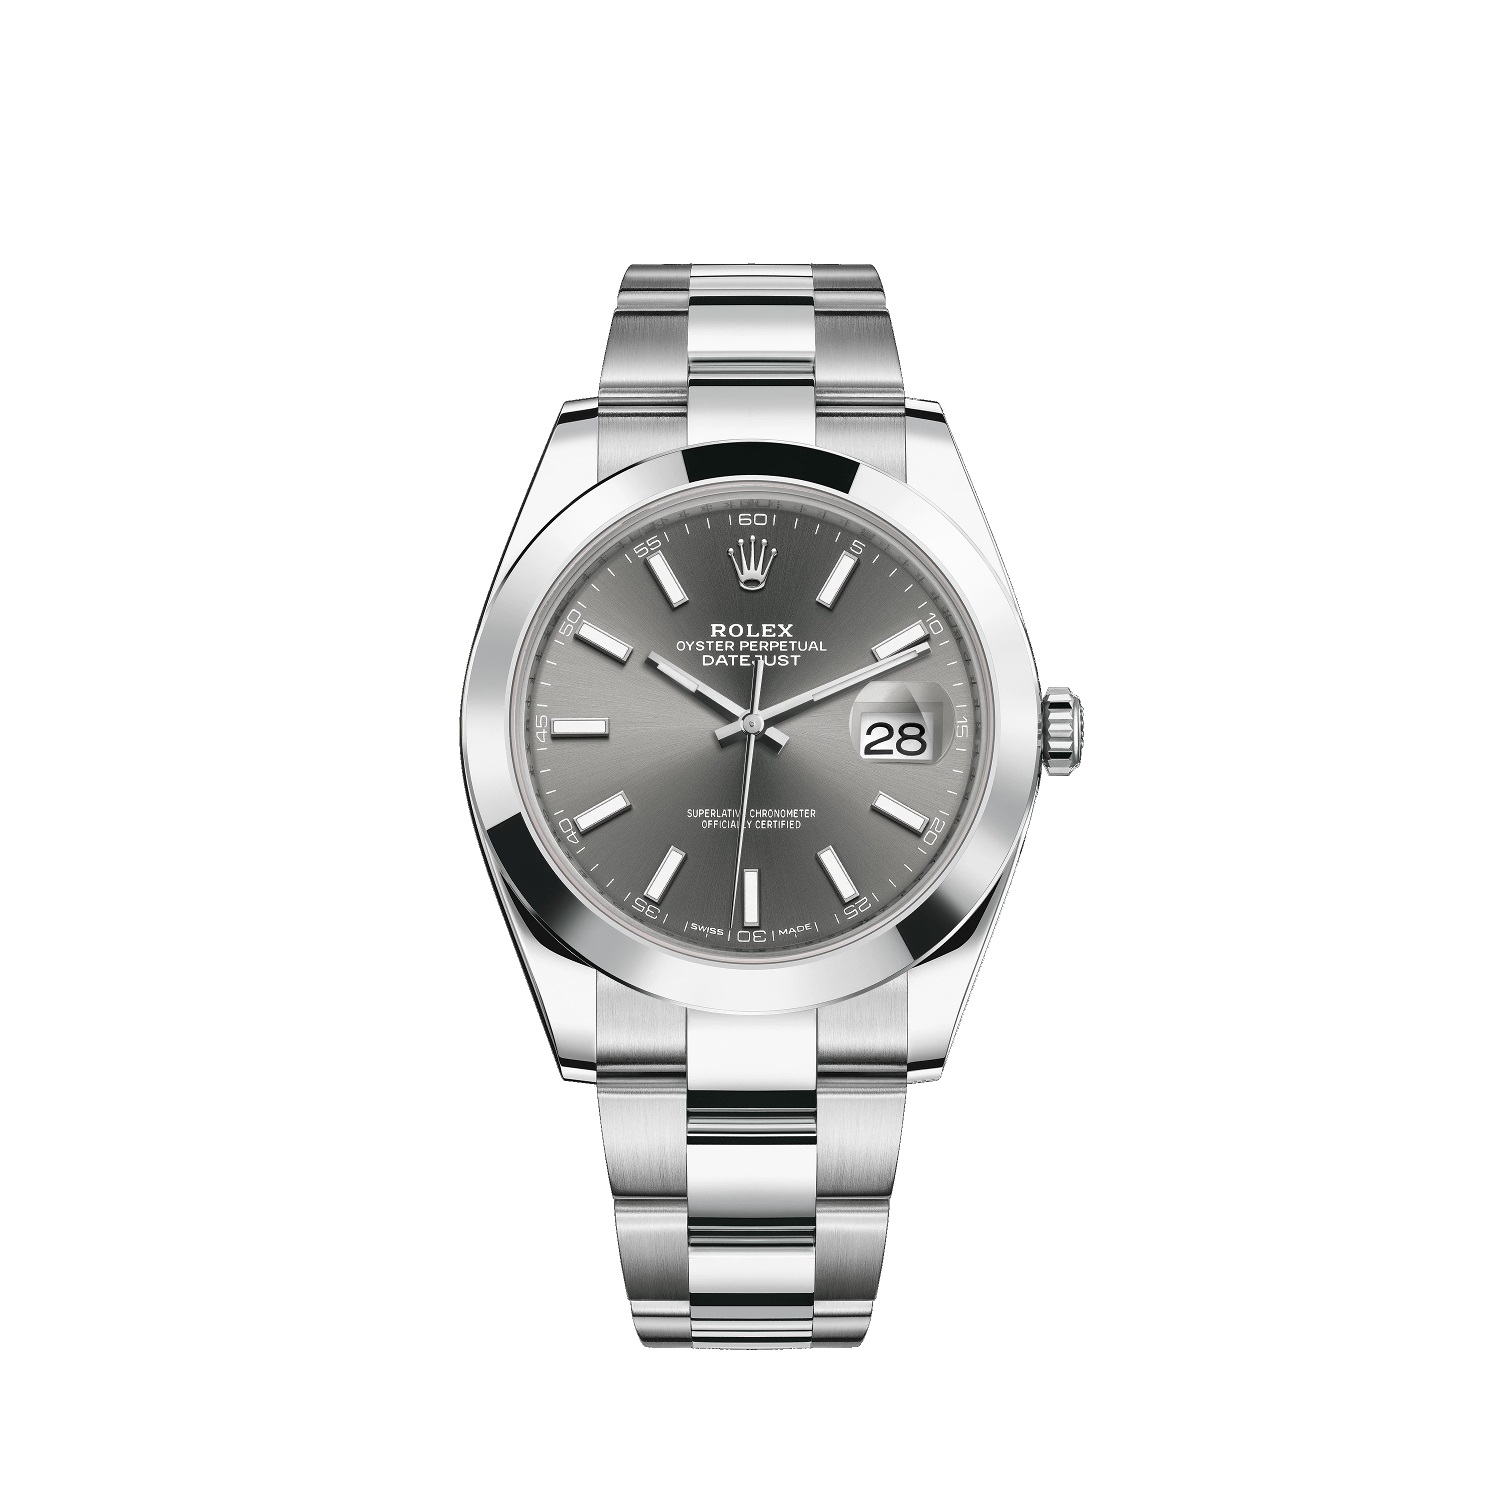 Datejust 41 126300 Stainless Steel Watch (Slate)